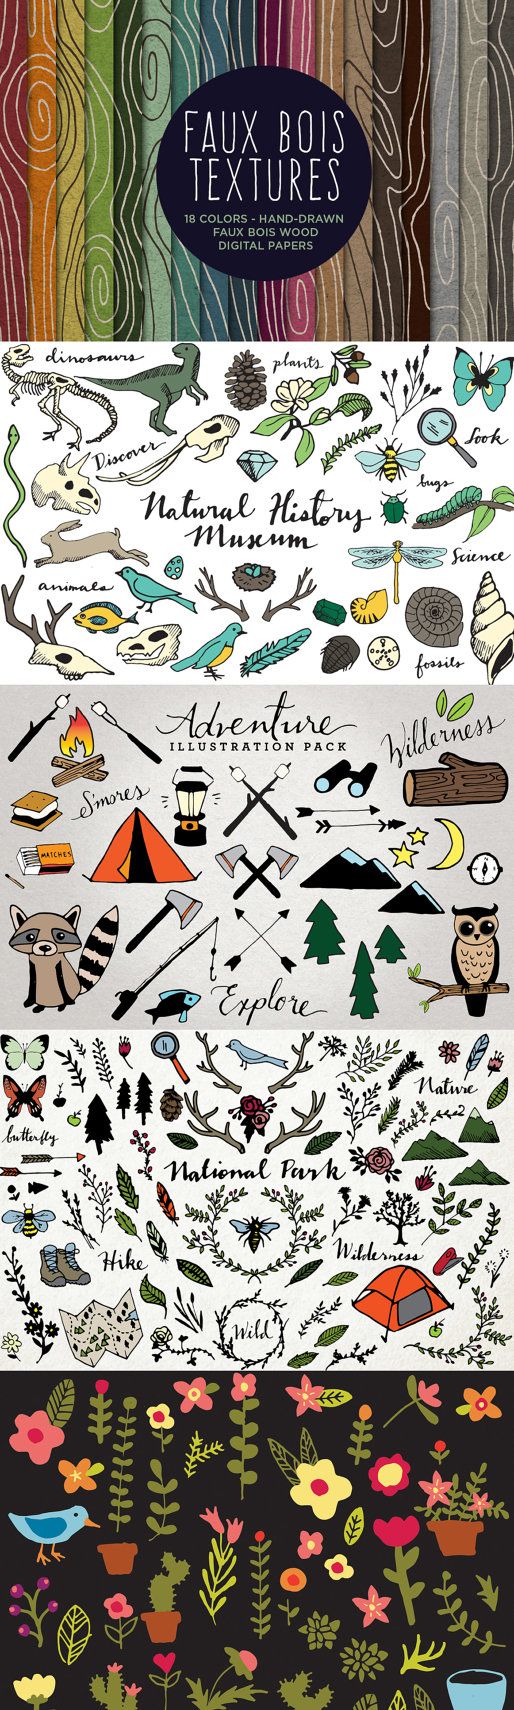 Nature Clipart MEGAPACK! Camping clipart, wilderness clipart, hand